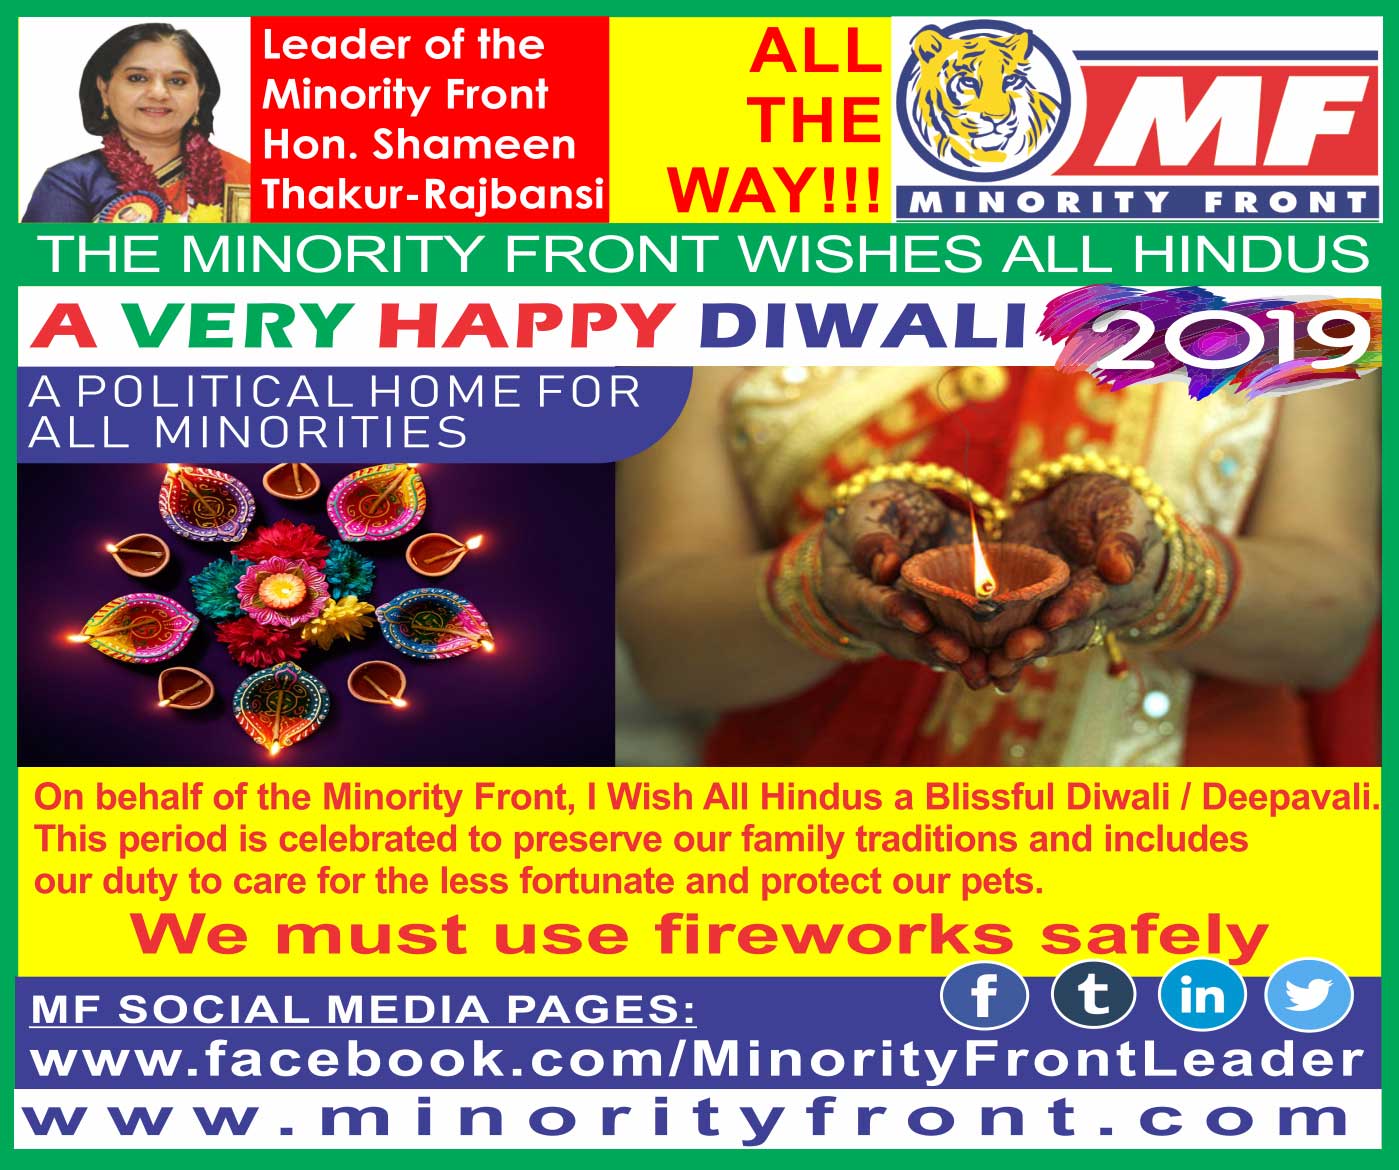 The Minority Front Wishes All a Happy Diwali 2019